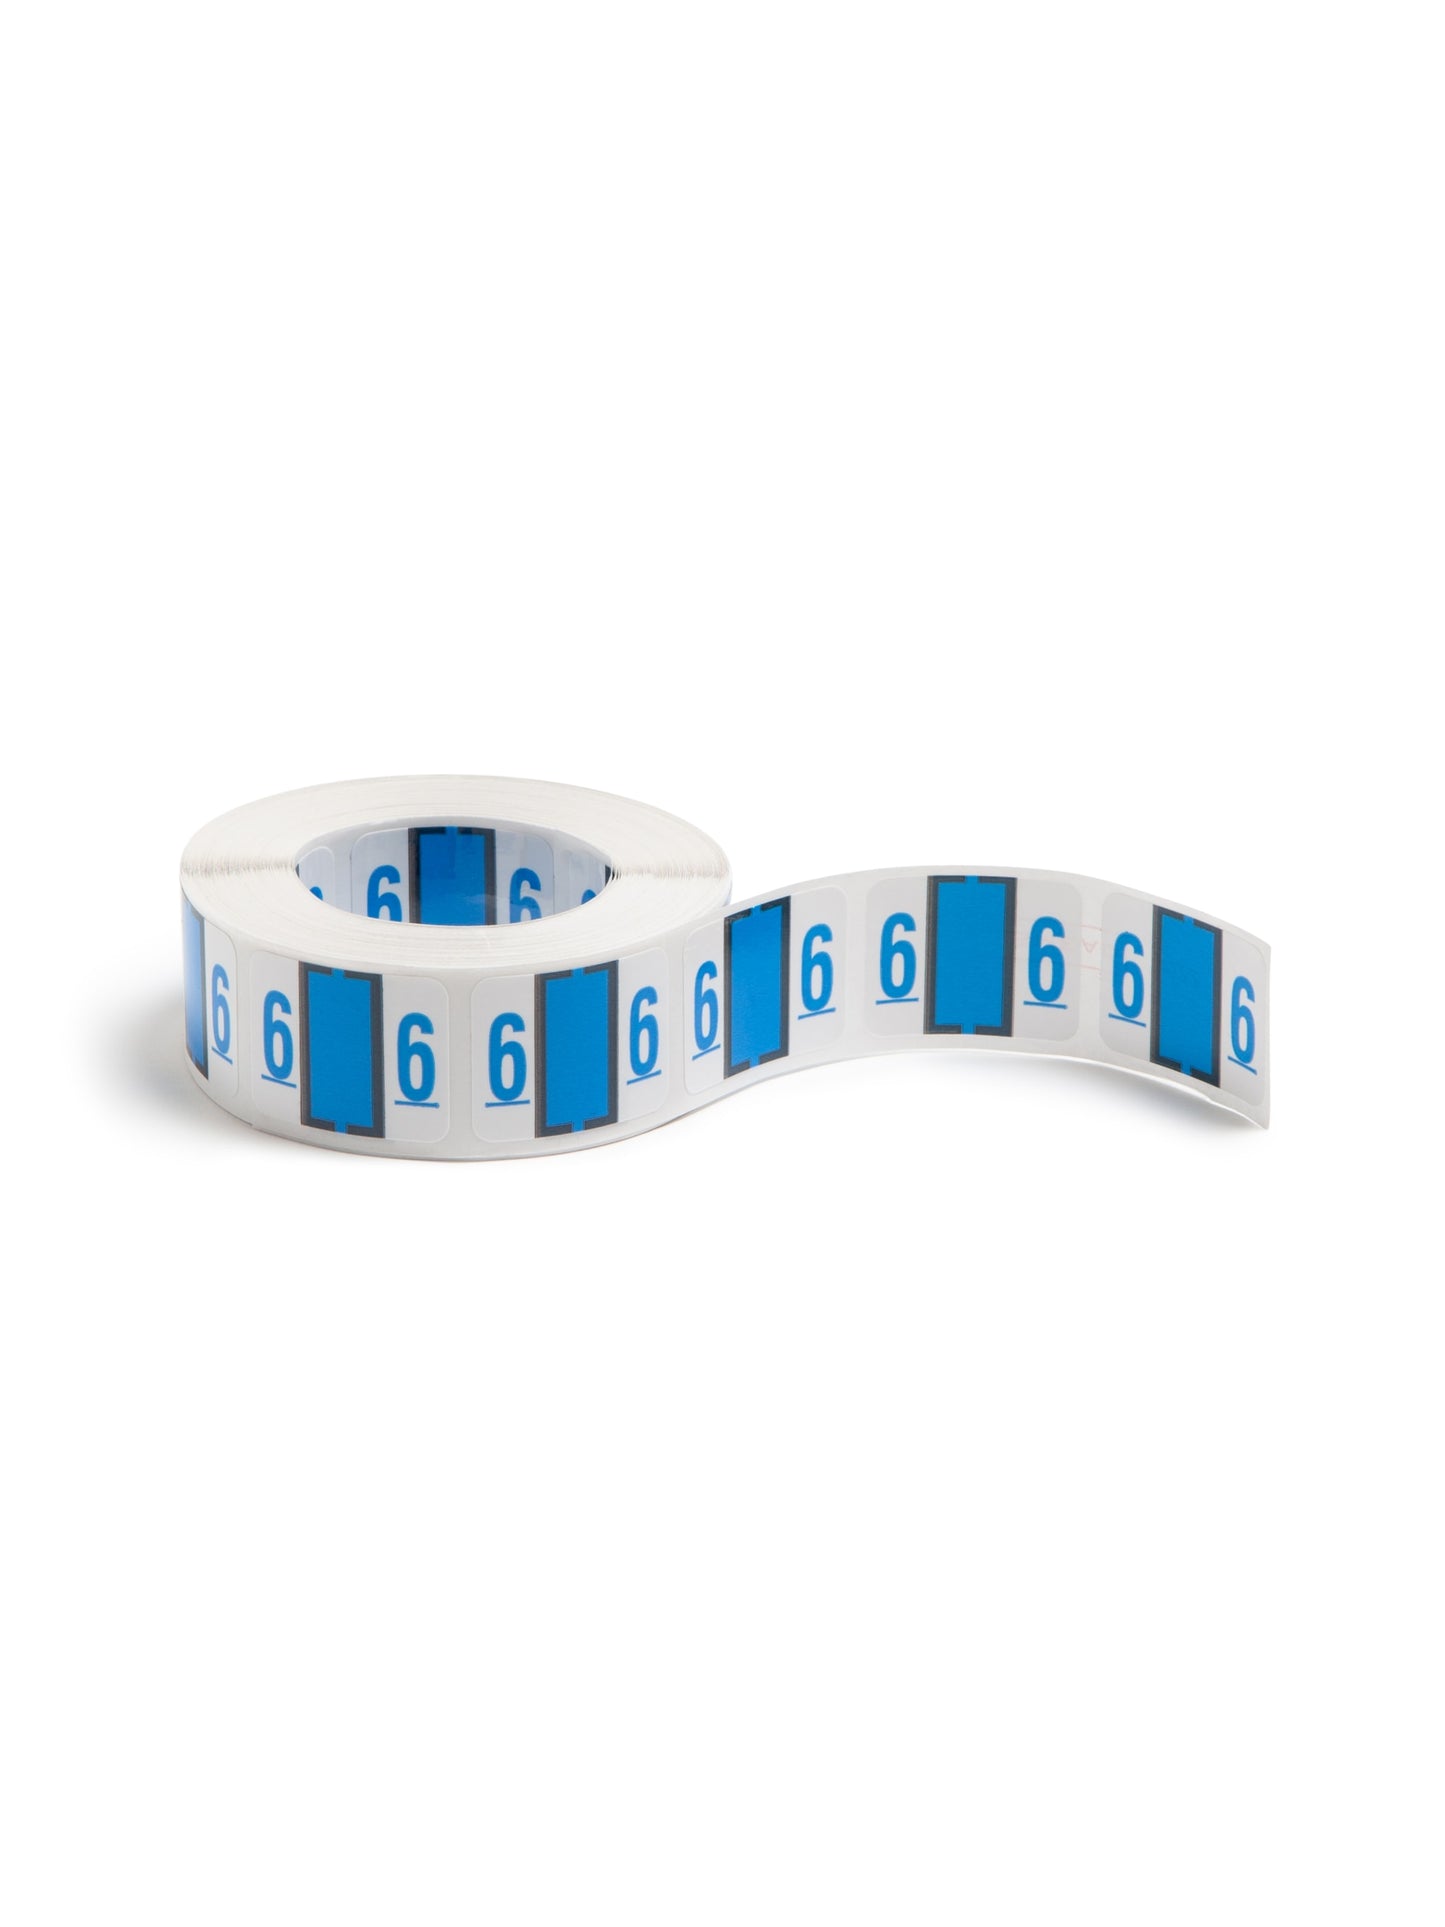 BCCRN Bar Style Color-Coded Numeric Labels, 0-9 Rolls, Blue Color, 1-1/4" X 1" Size, Set of 1, 086486673761